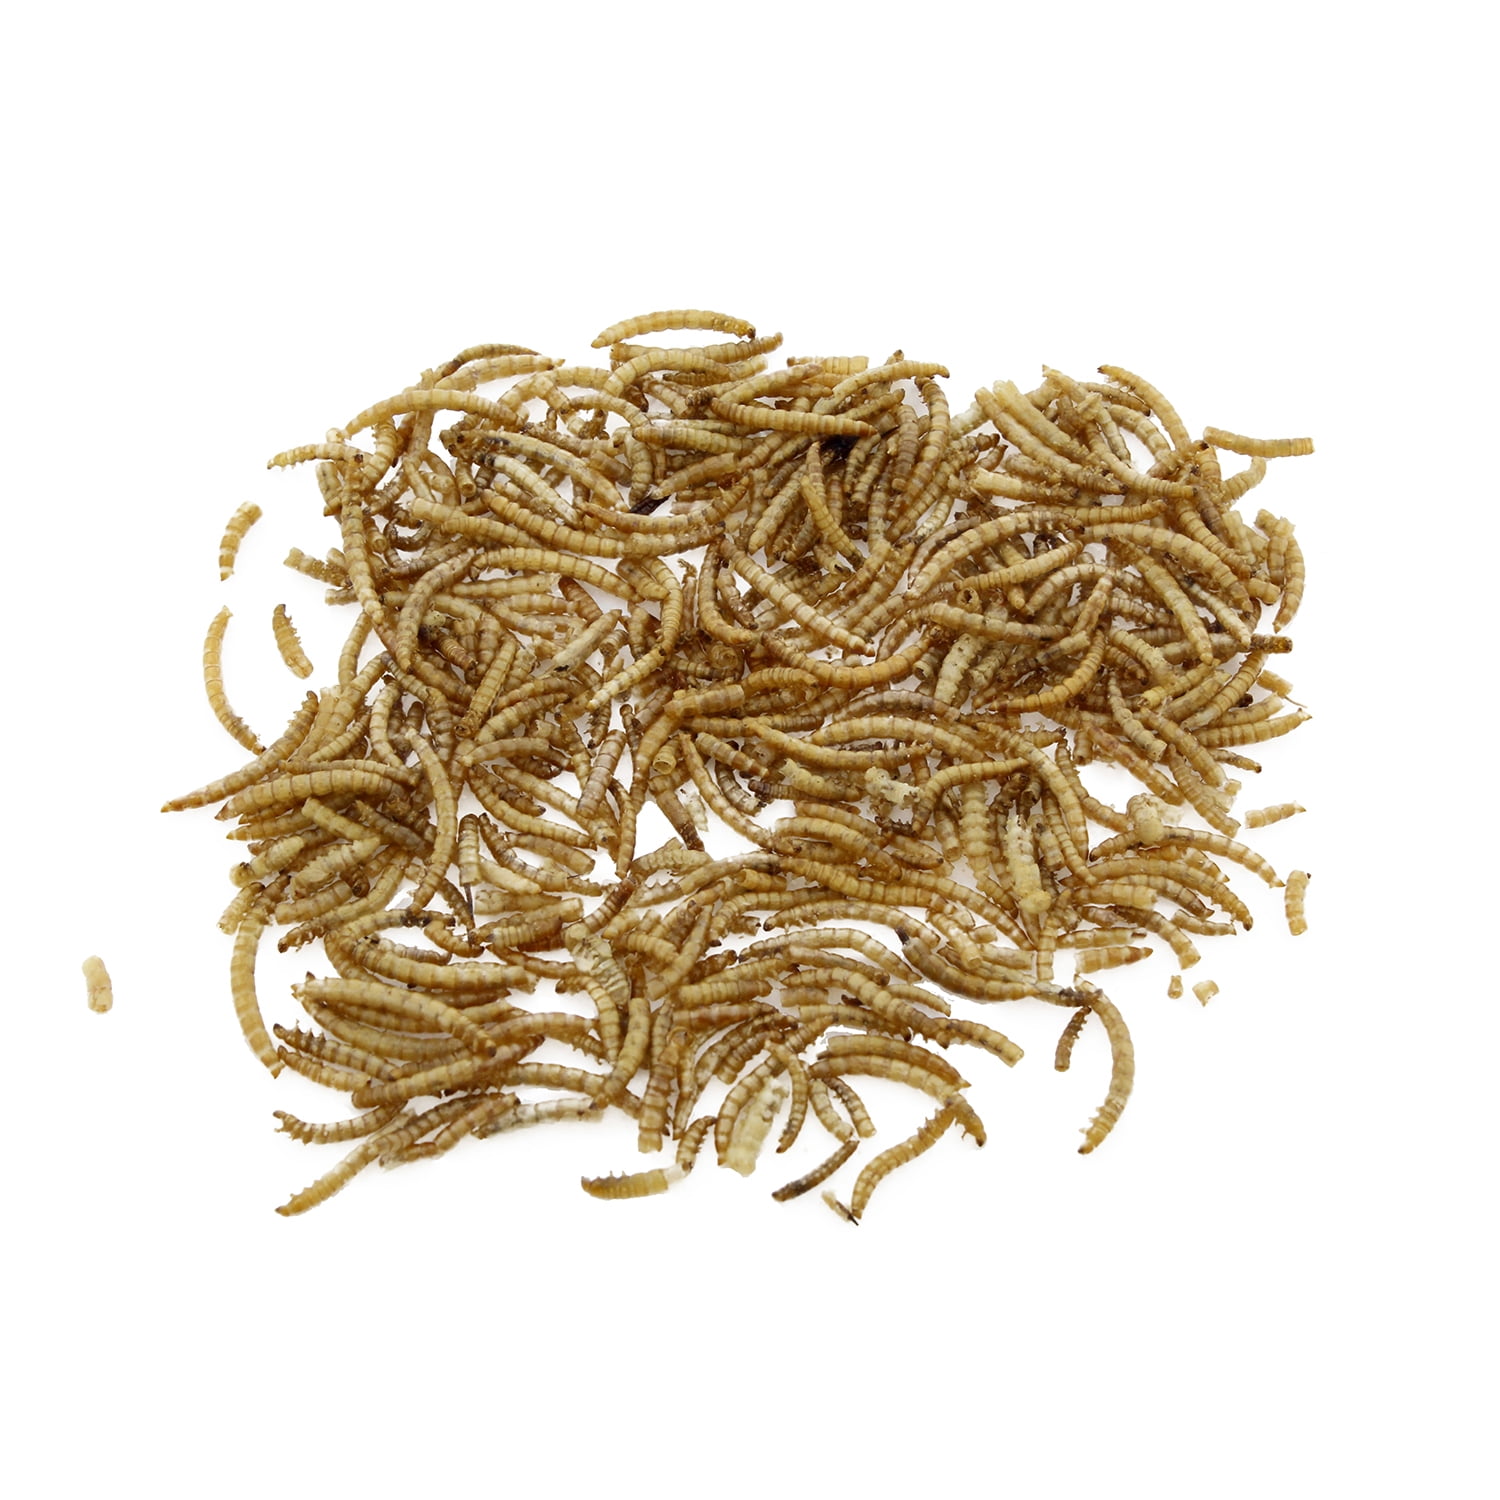 Rural365 Dried Mealworms for Chickens 11 Pounds Protein Filled Chicken Treats 